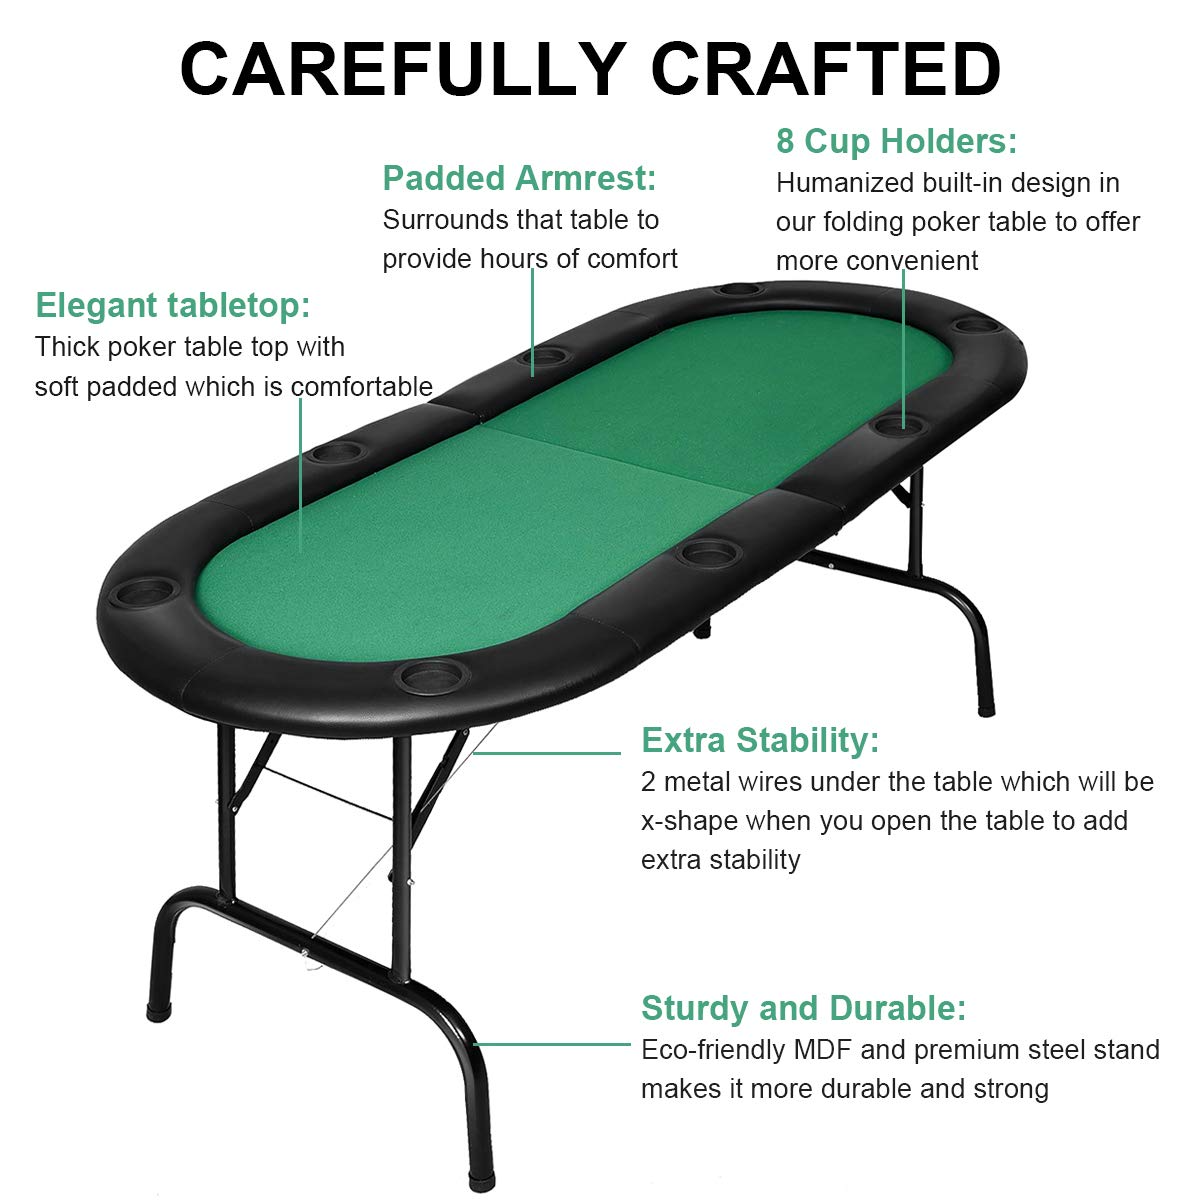 Giantex Foldable Play Poker Table w/Cup Holder, for Texas Casino Leisure Game Room,